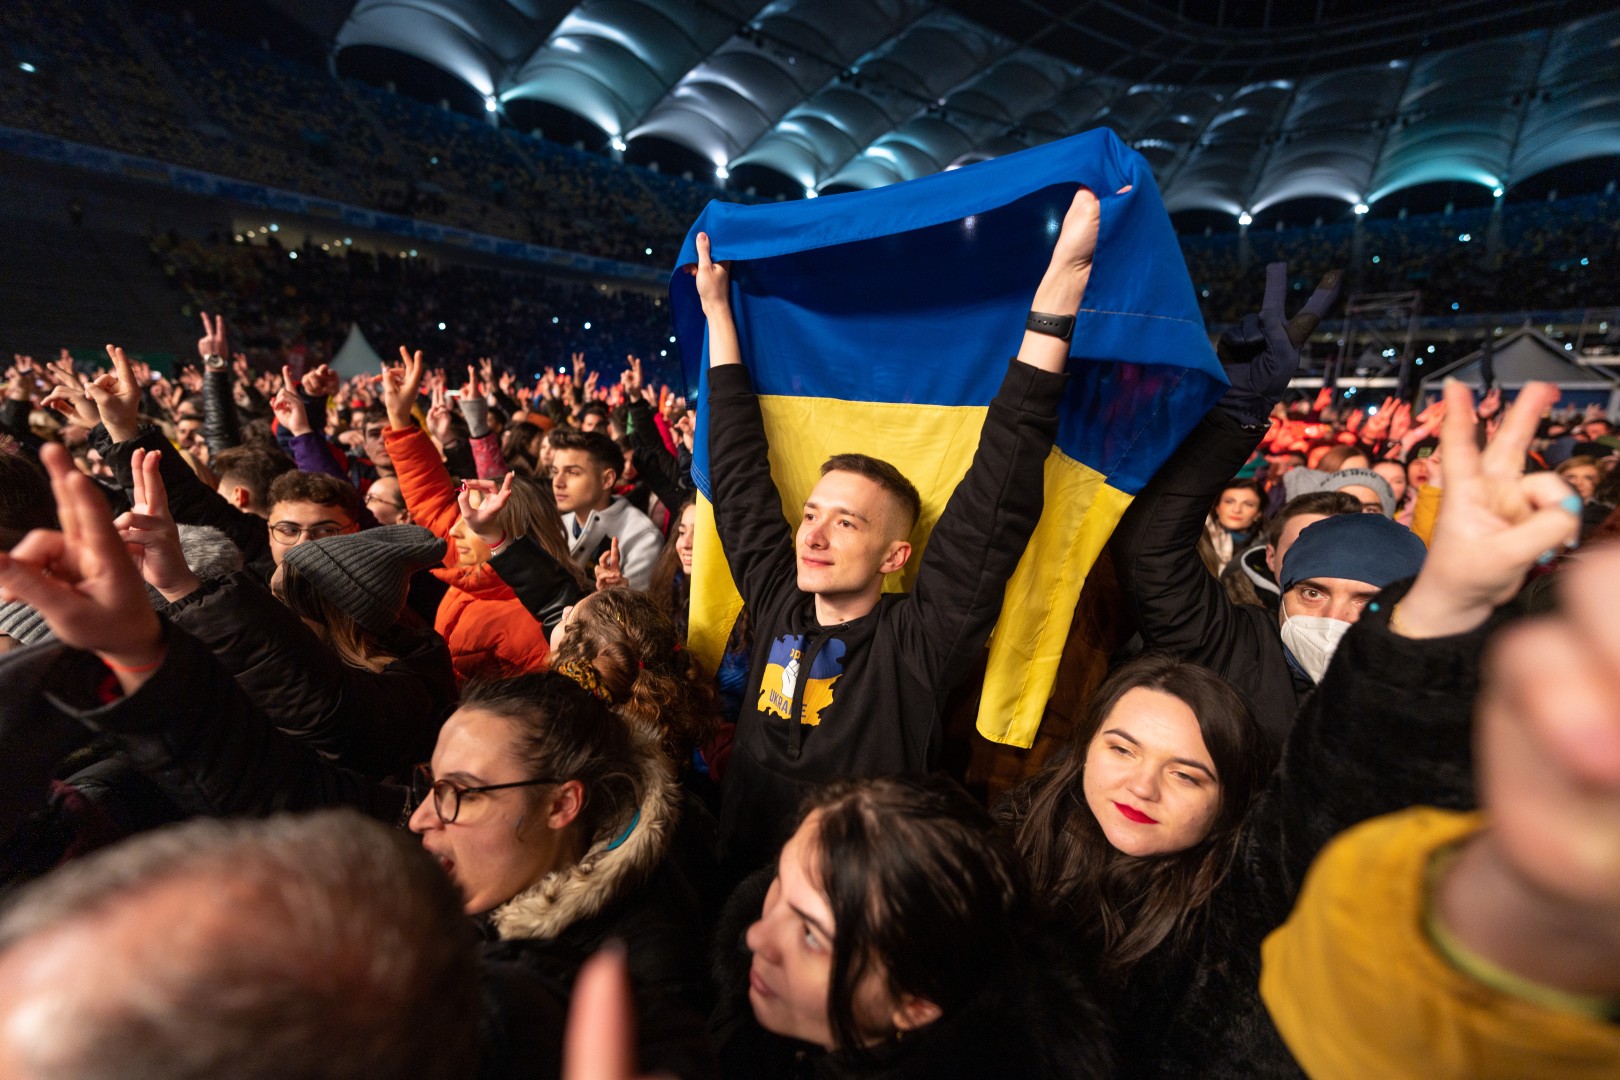 Public at National Arena in Bucharest on March 12, 2022 (8cede8ac93)